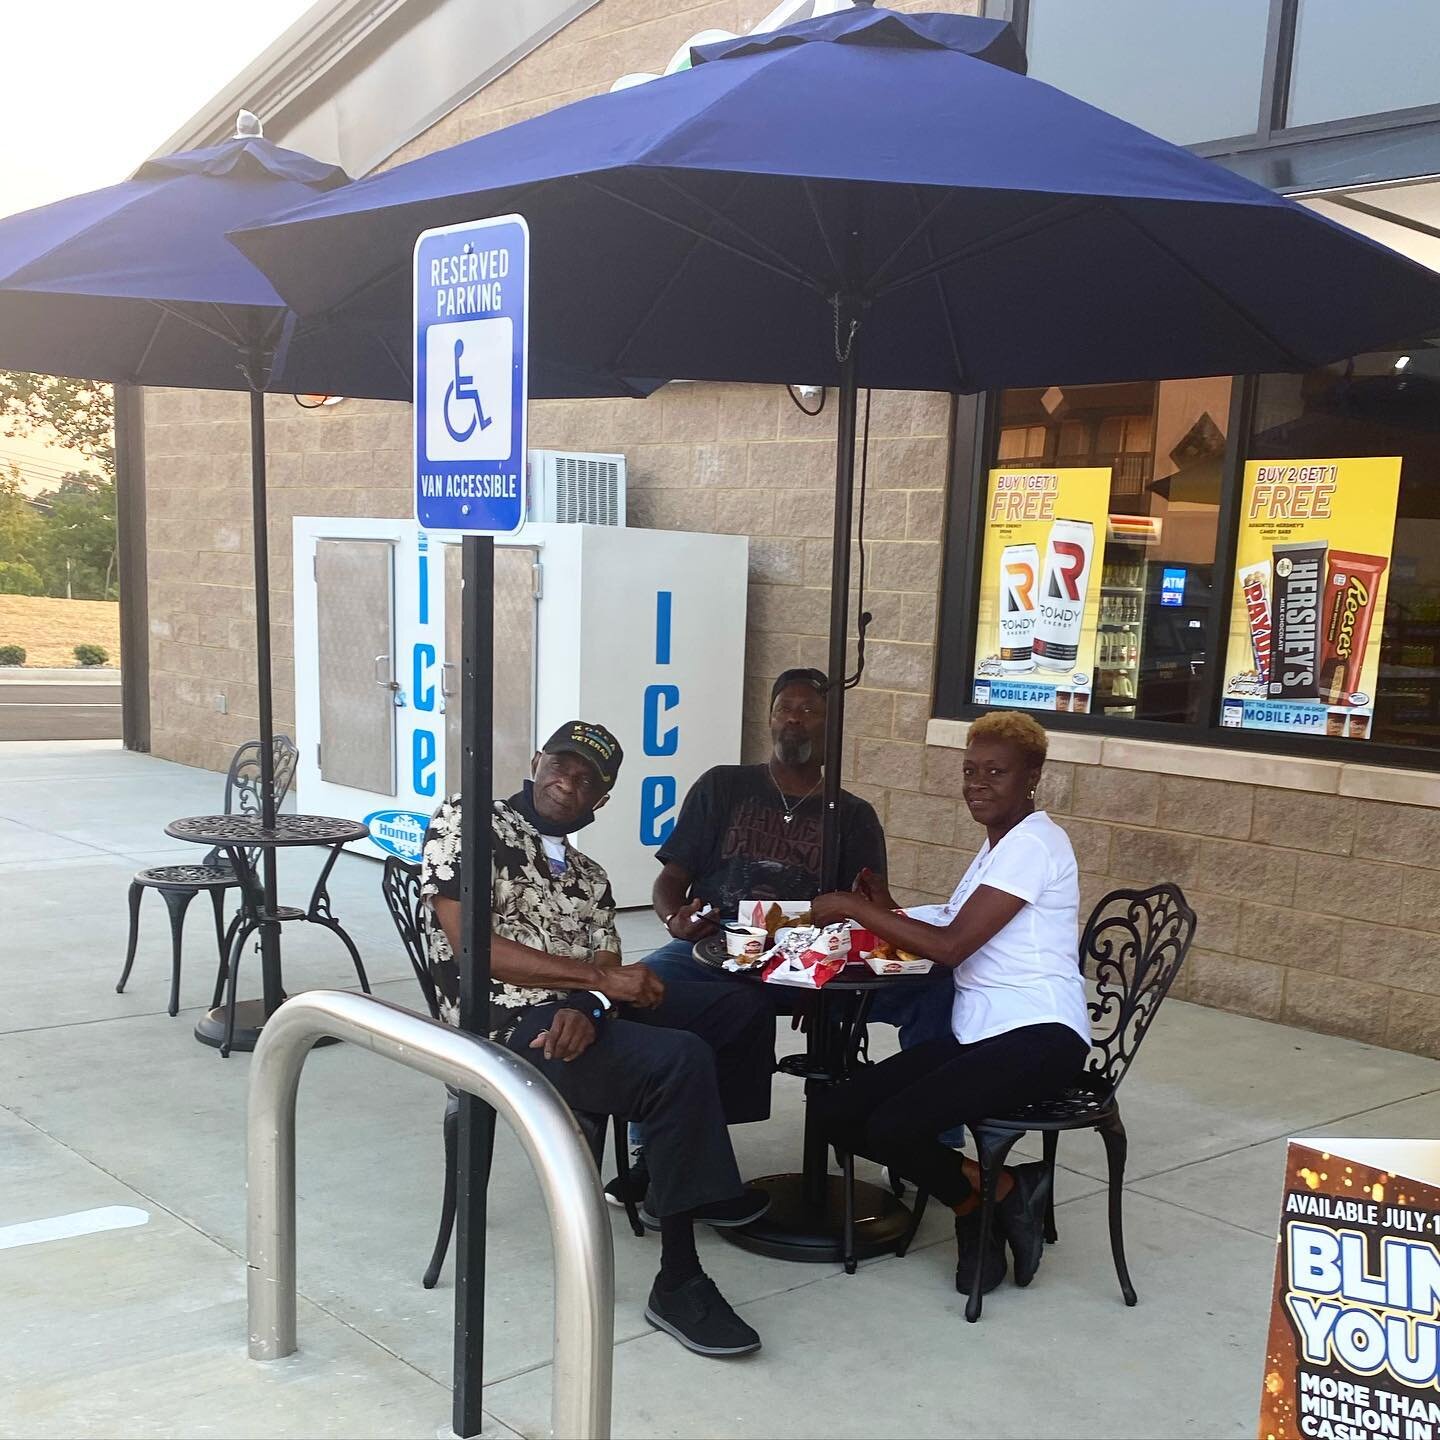 Customers enjoying the outdoor dining area at the brand new store in Georgetown, KY that opened this week! 💙💙💙

#ReturnRefreshRefuel